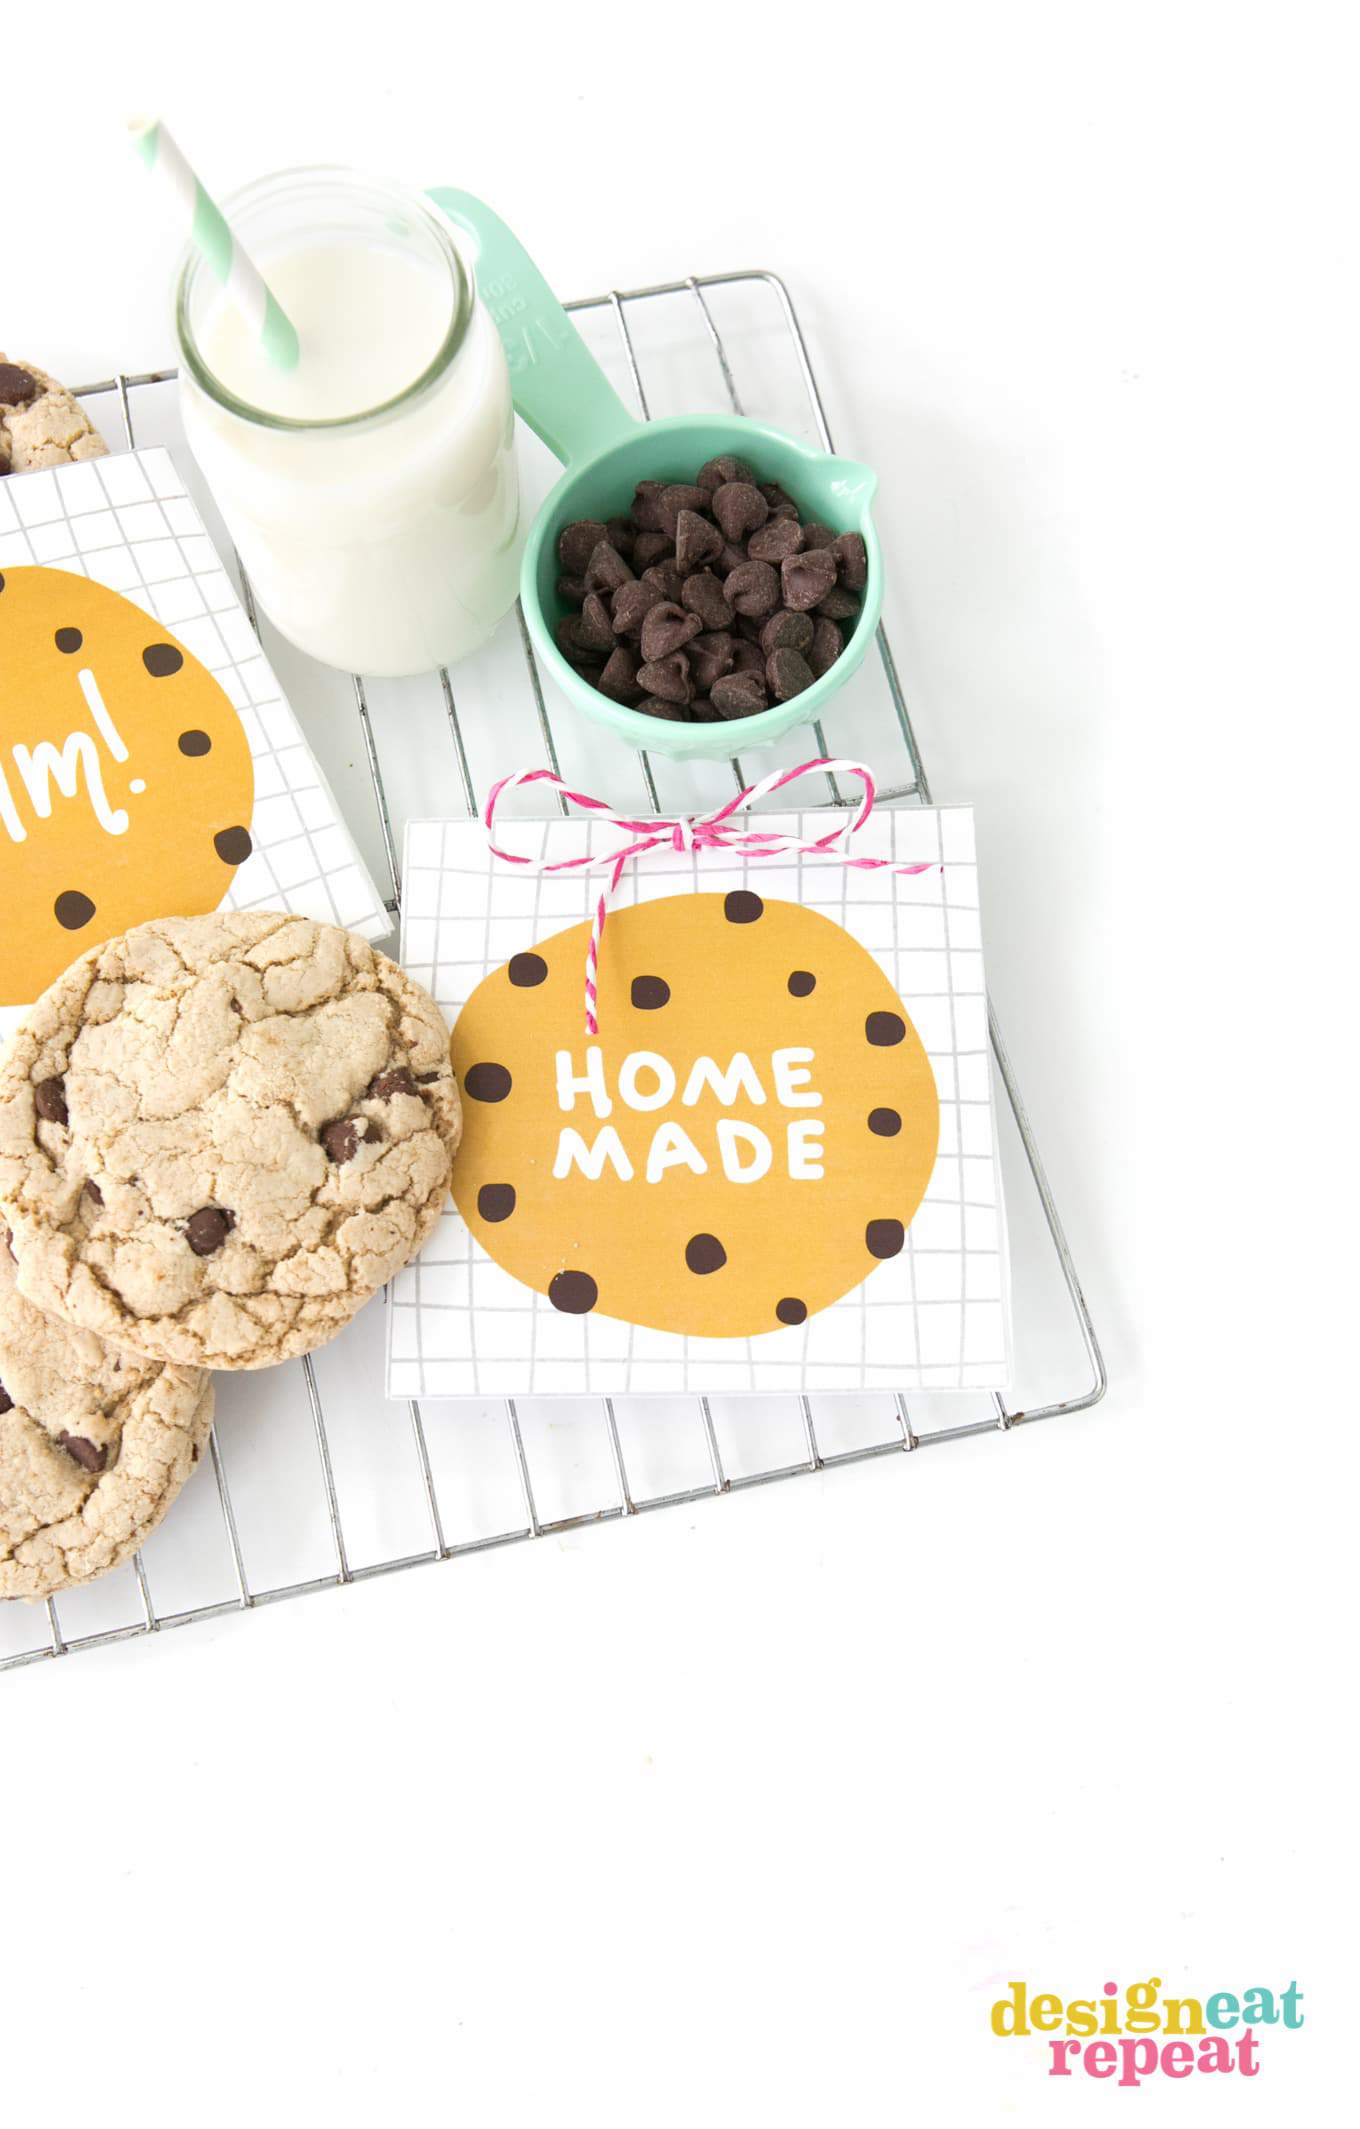 Chocolate chip cookie bag that says "Homemade" on top on cooling rack with jar of milk.